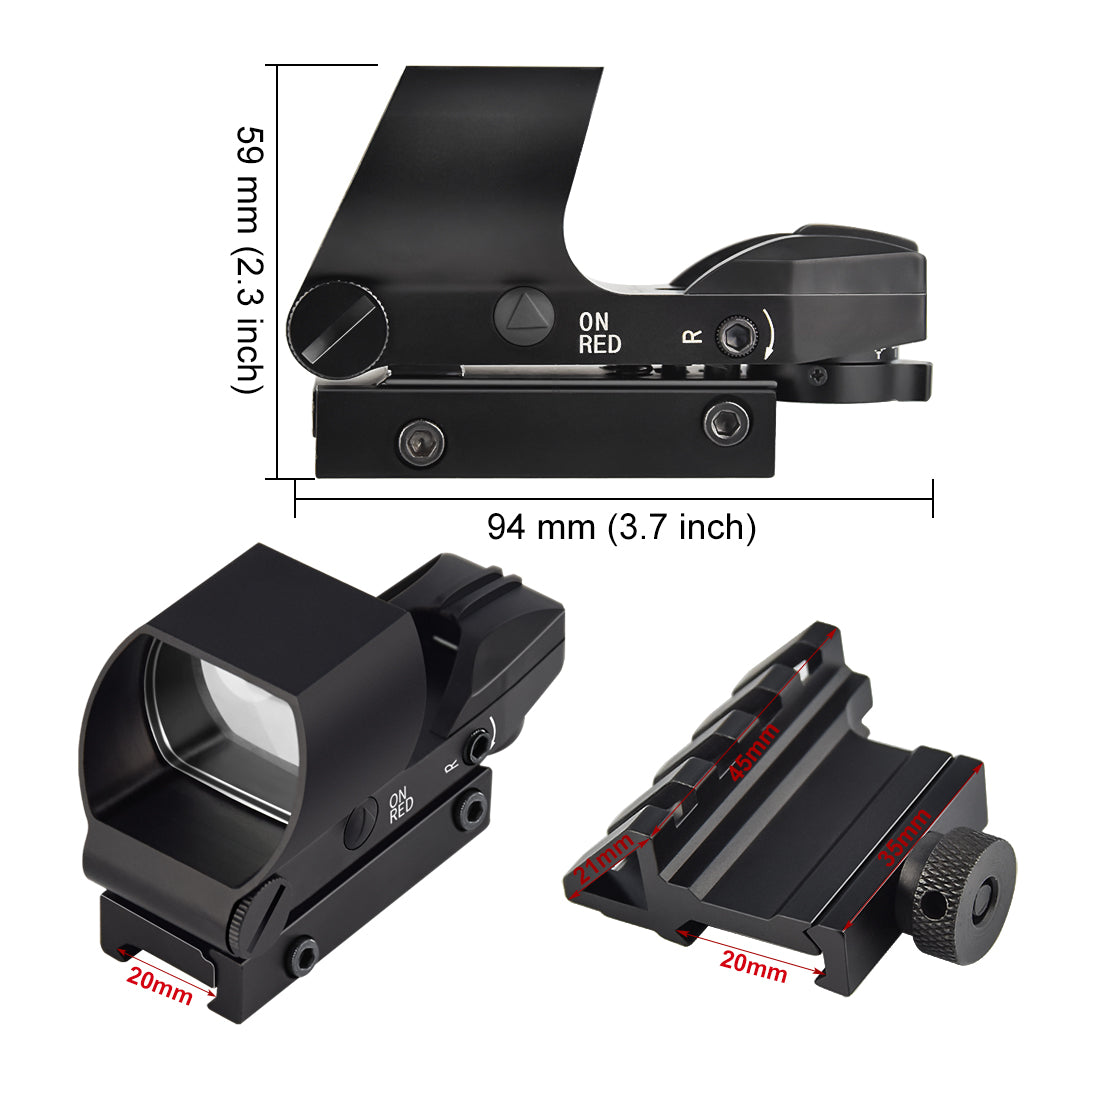 Feyachi Reflex Sight Red & Green Dot G&n Sight Scope 4 Reticles with 45 Degree Rail Mount, Upgraded On/Off Switch